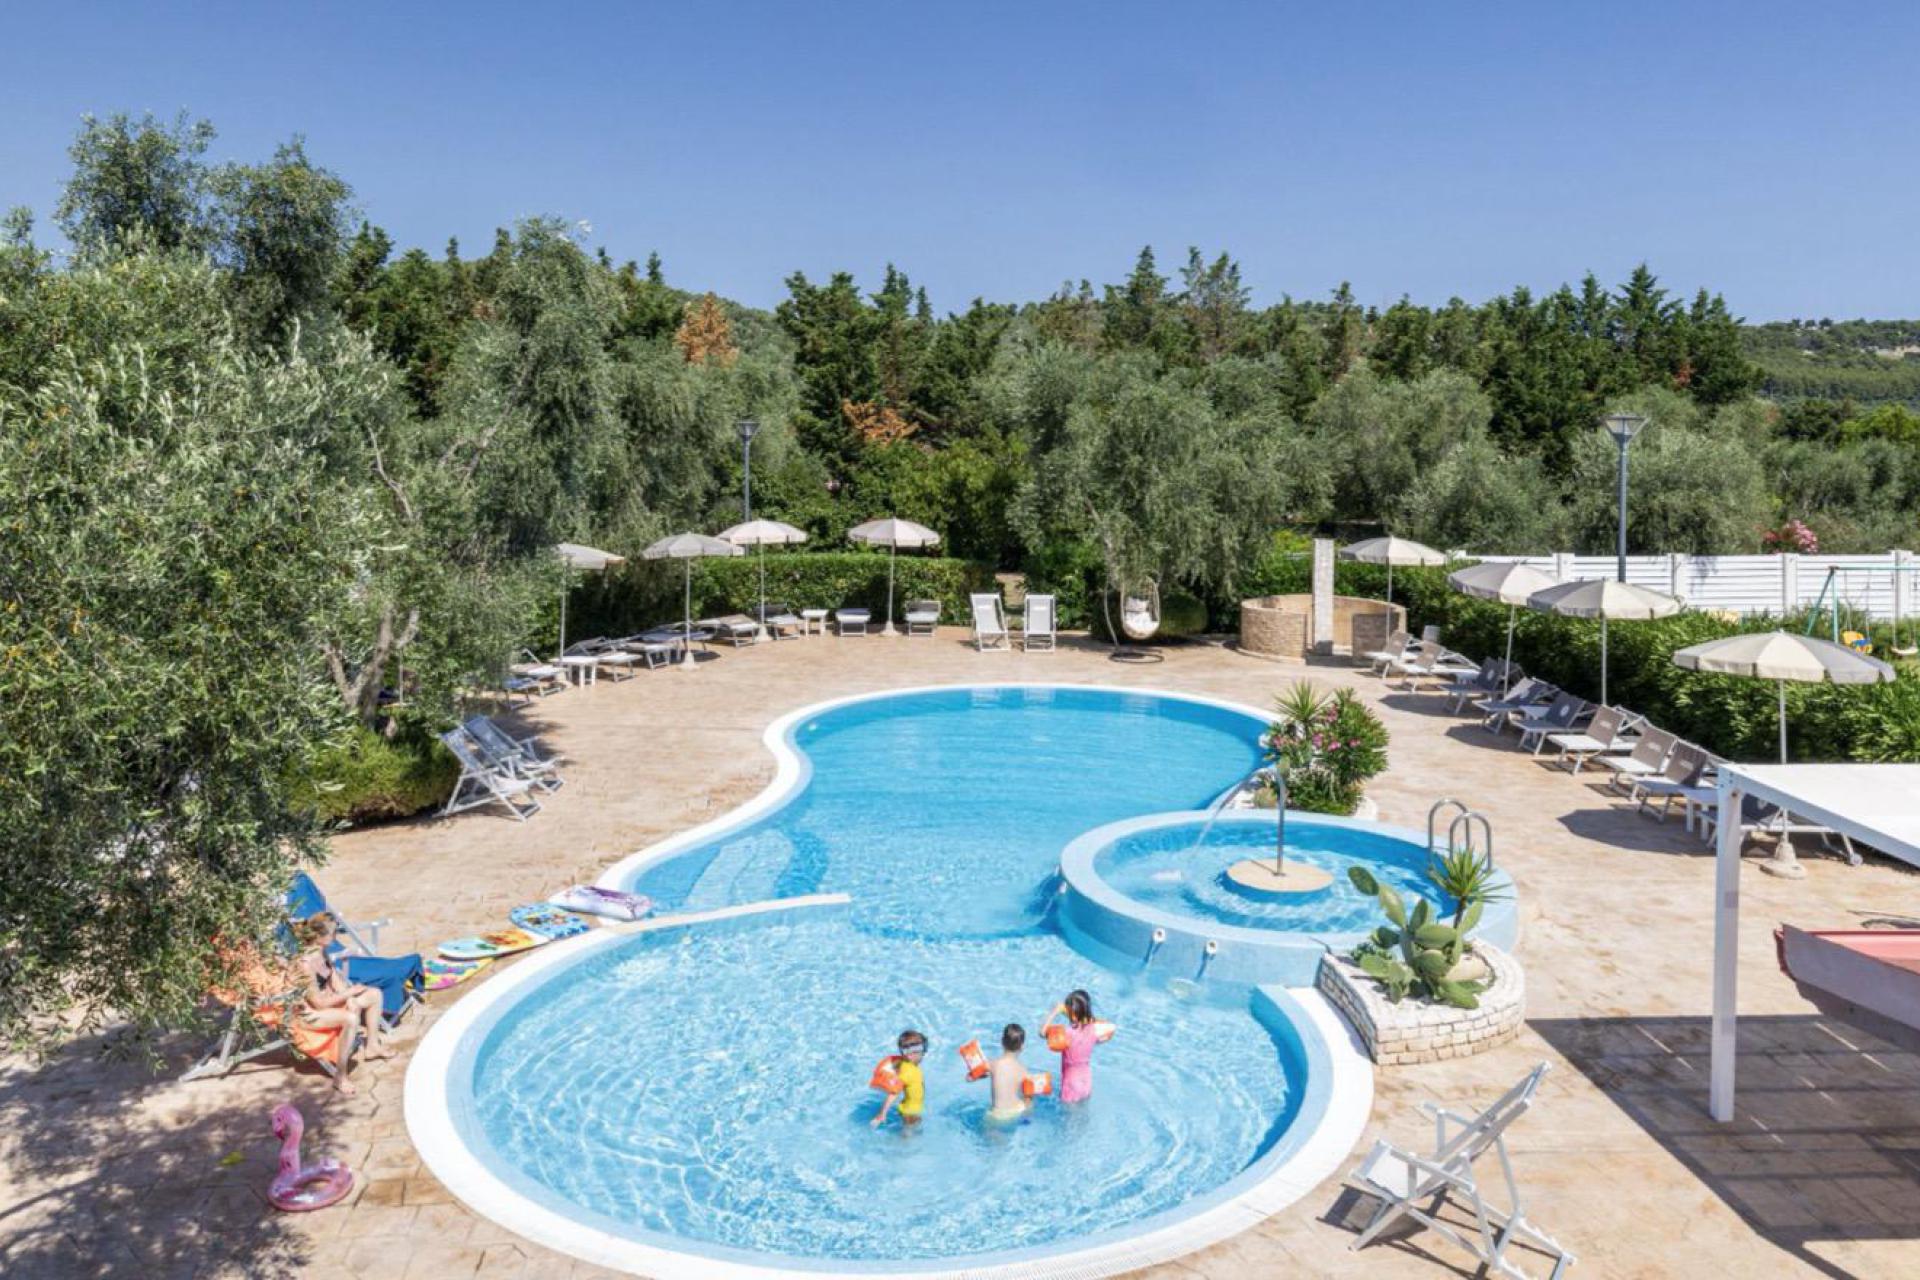 Child-friendly Agriturismo in Puglia by the sea and beach